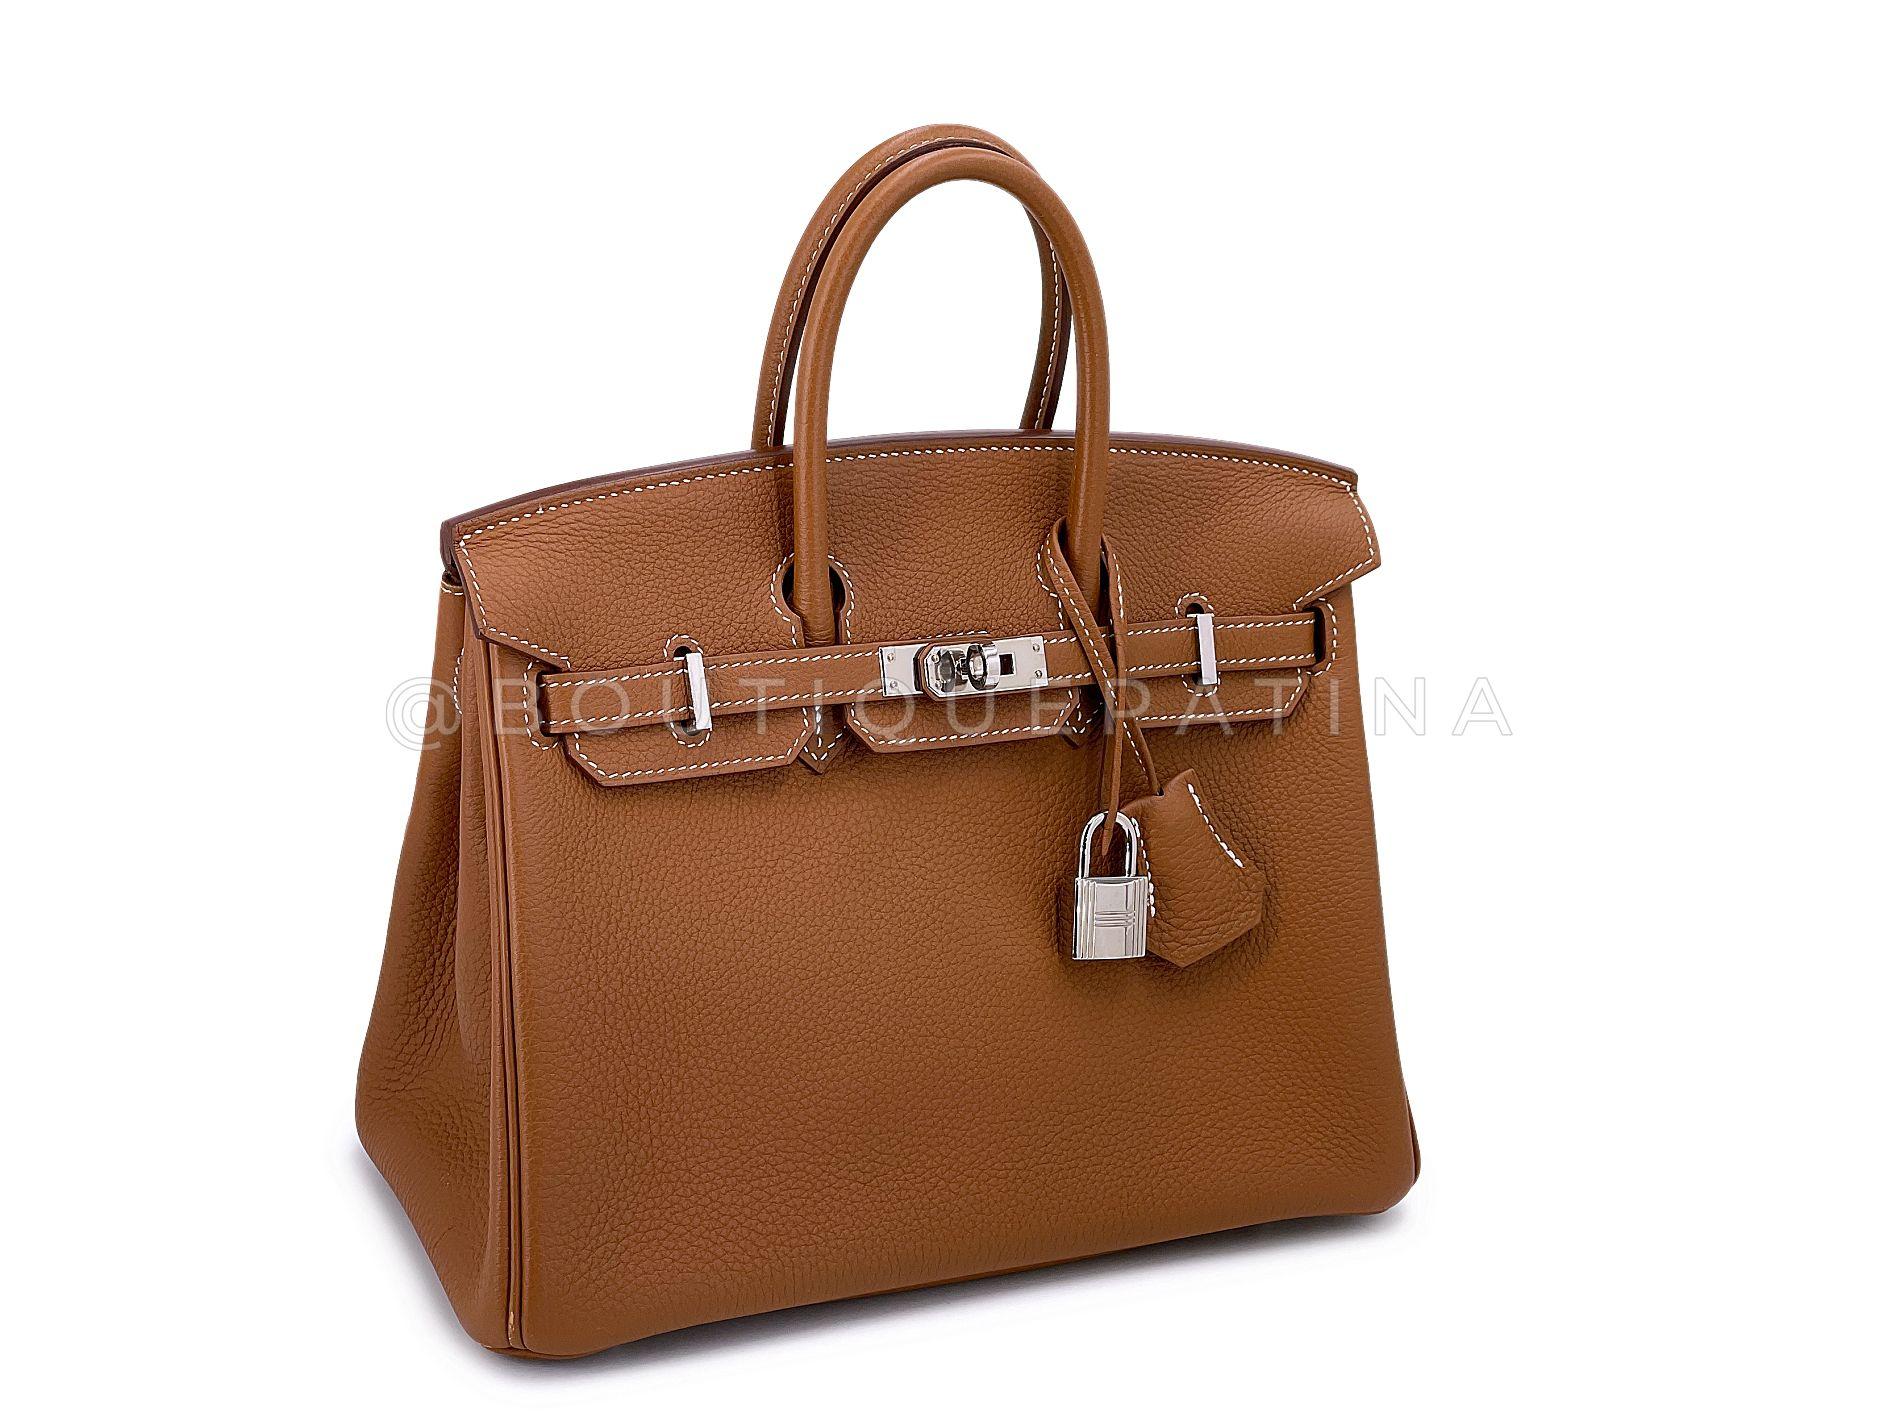 Store item: 67913
The Hermès Birkin is probably one of the most coveted and desired bags in the world. Hand crafted and hand stitched, these bags are extremely hard to find.

Interior is lined in chevre (goatskin) leather, and features a side pocket